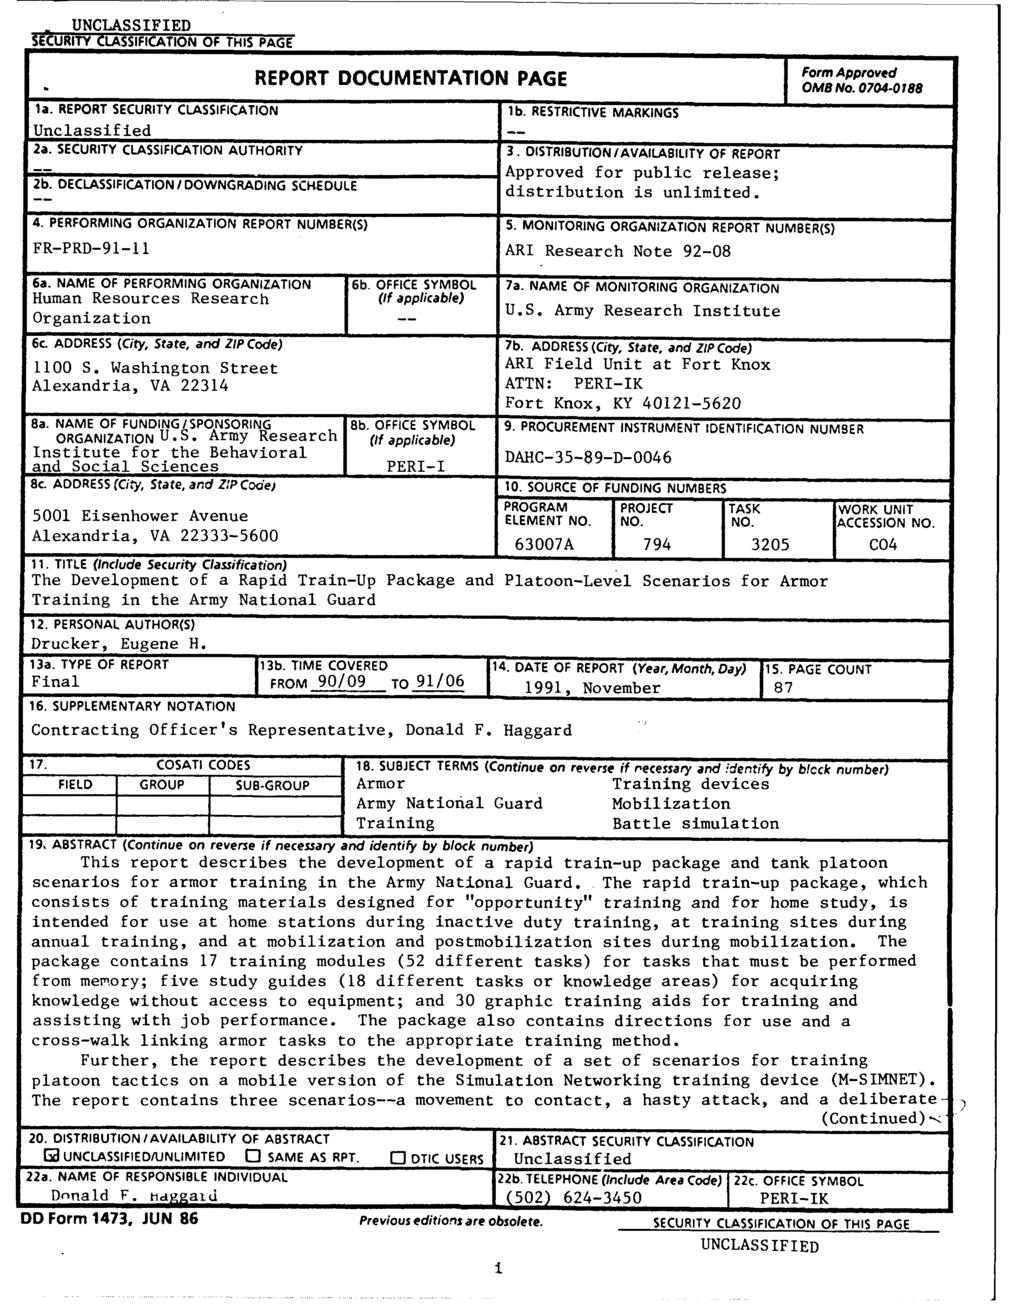 R UNCLASSIFIED SECURITY CLASSIFICATION OF THIS PAGE la. REPORT SECURITY CLASSIFICATION REPORT DOCUMENTATION PAGE FoMBNo. 0704.088 lb. RESTRICTIVE MARKINGS Unclassified -- 2a.